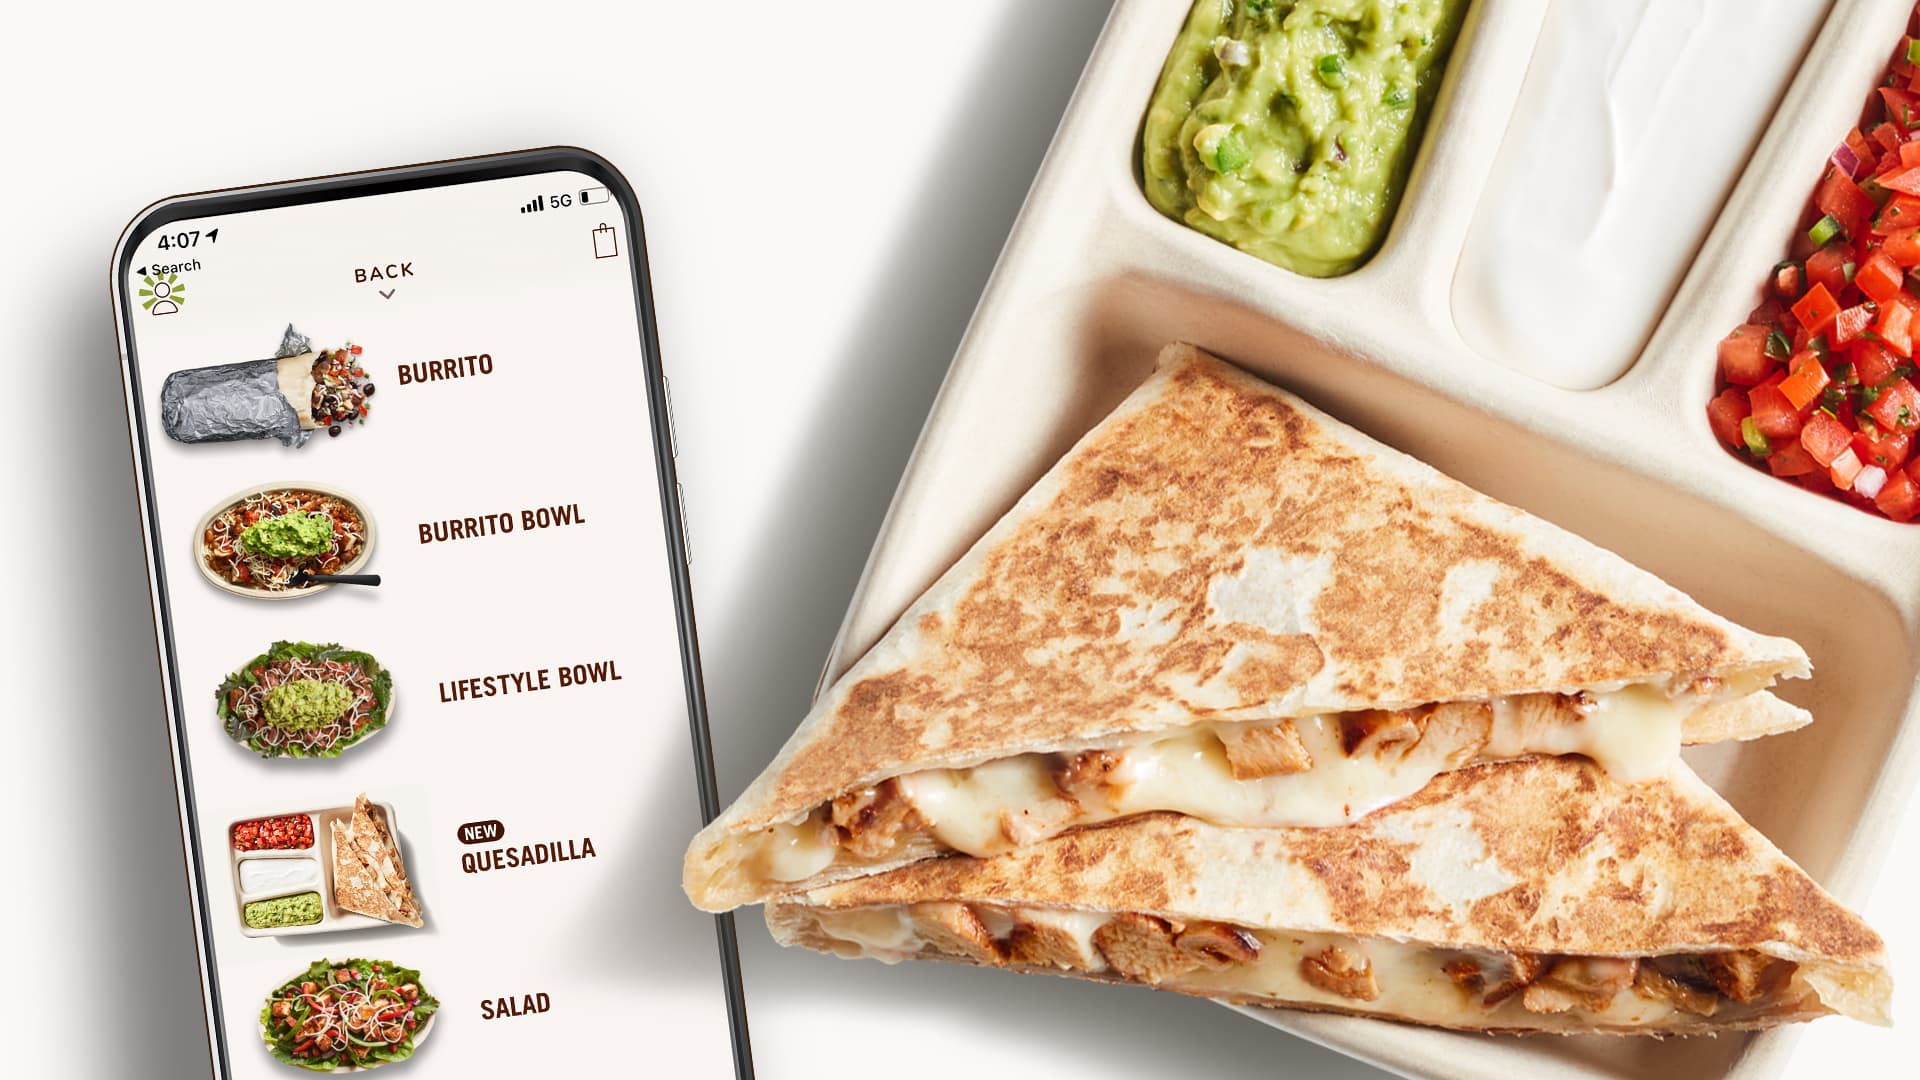 Chipotle’s quesadillas bring in new customers, contribute to the growth of digital sales